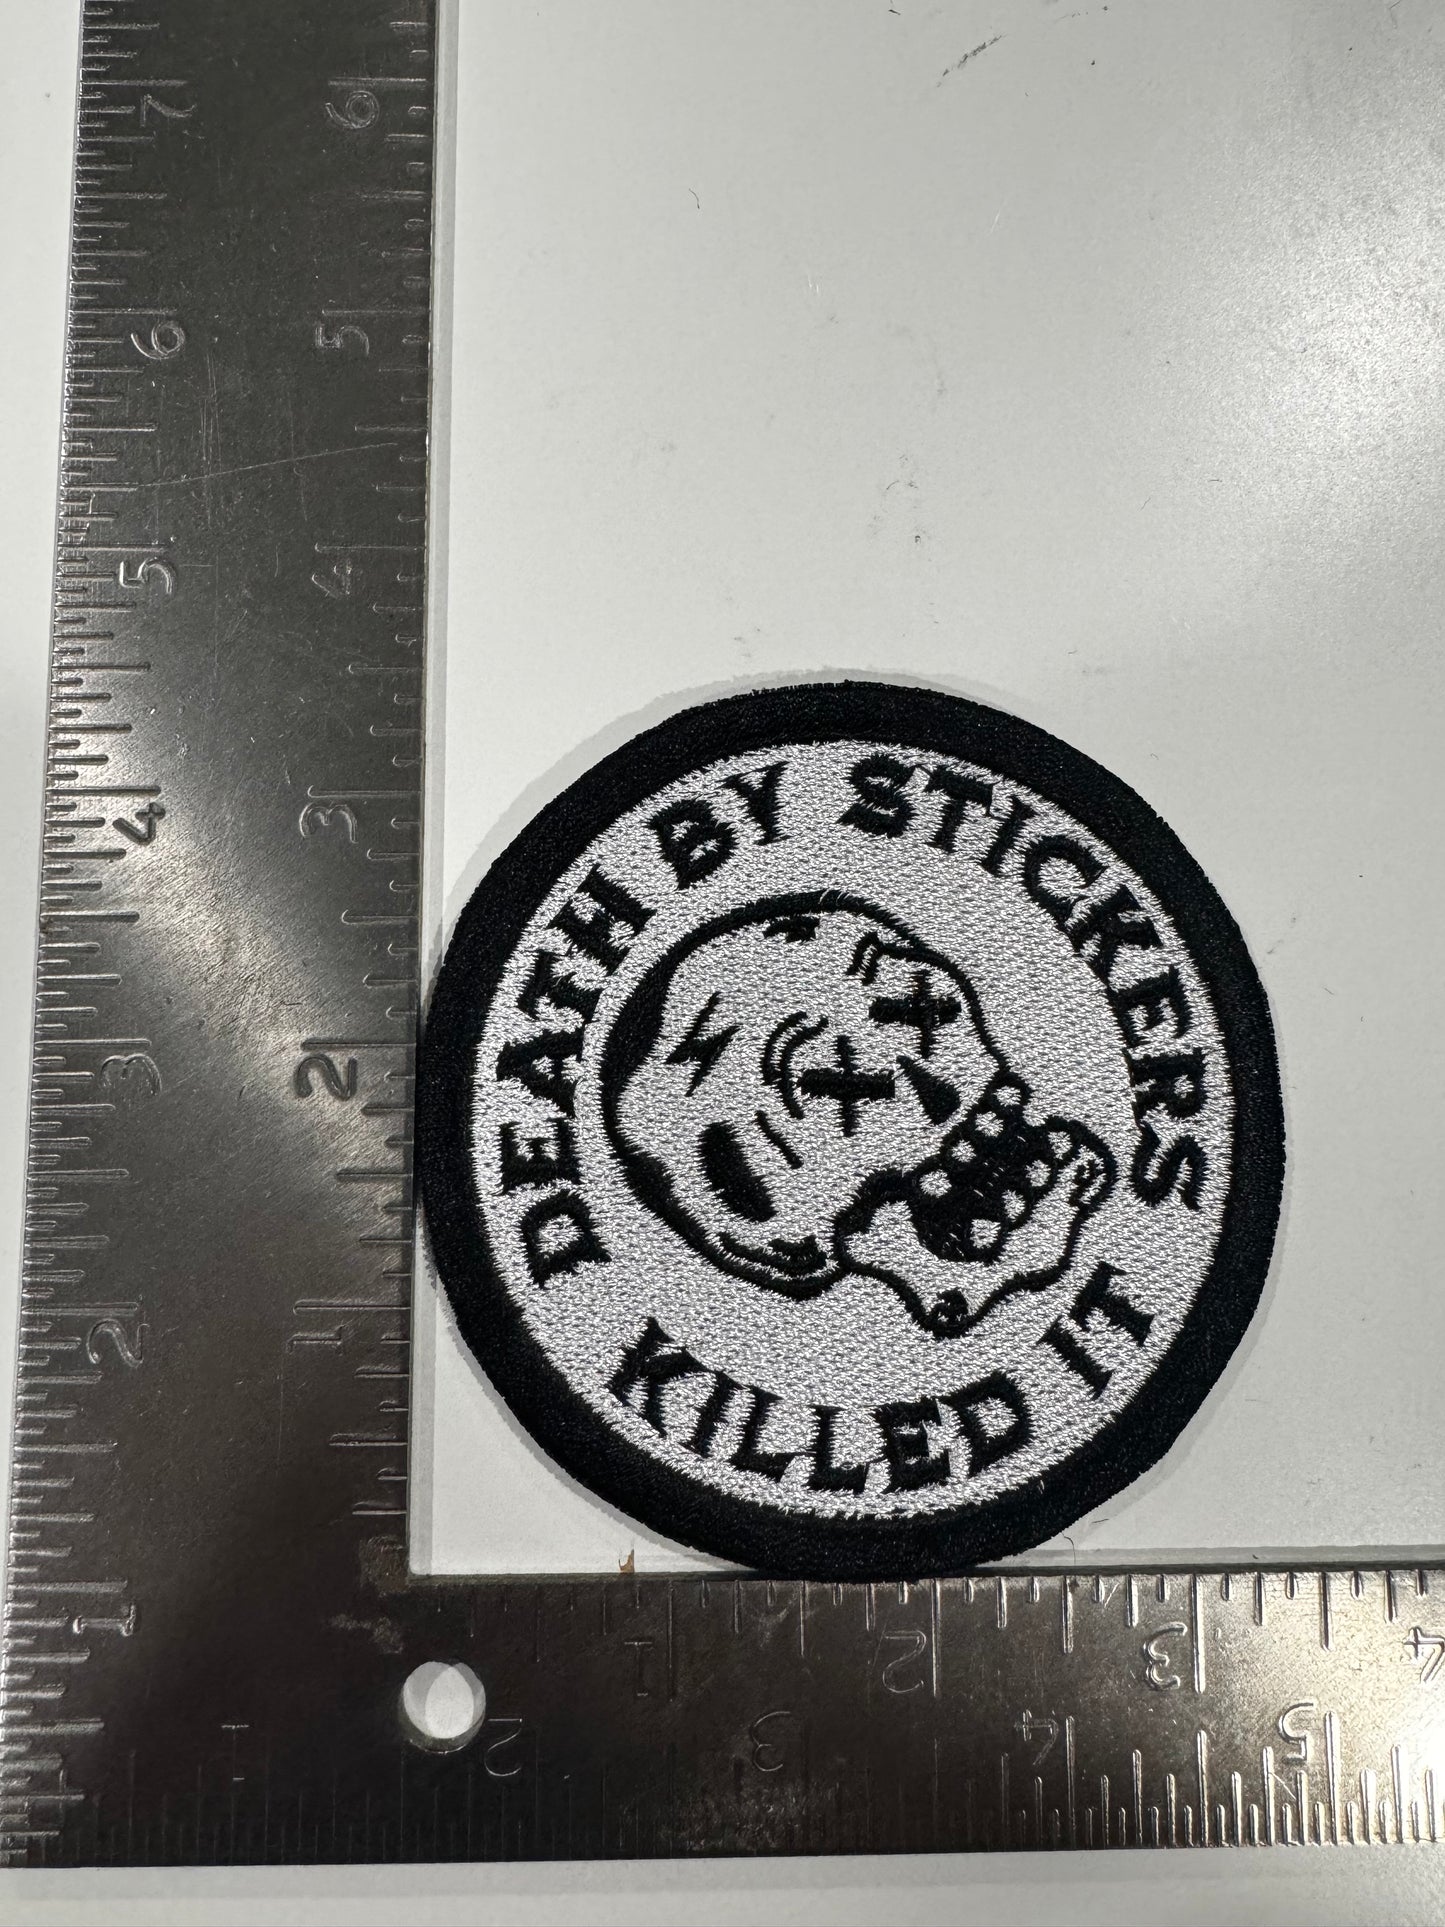 Custom Patches from Your Design